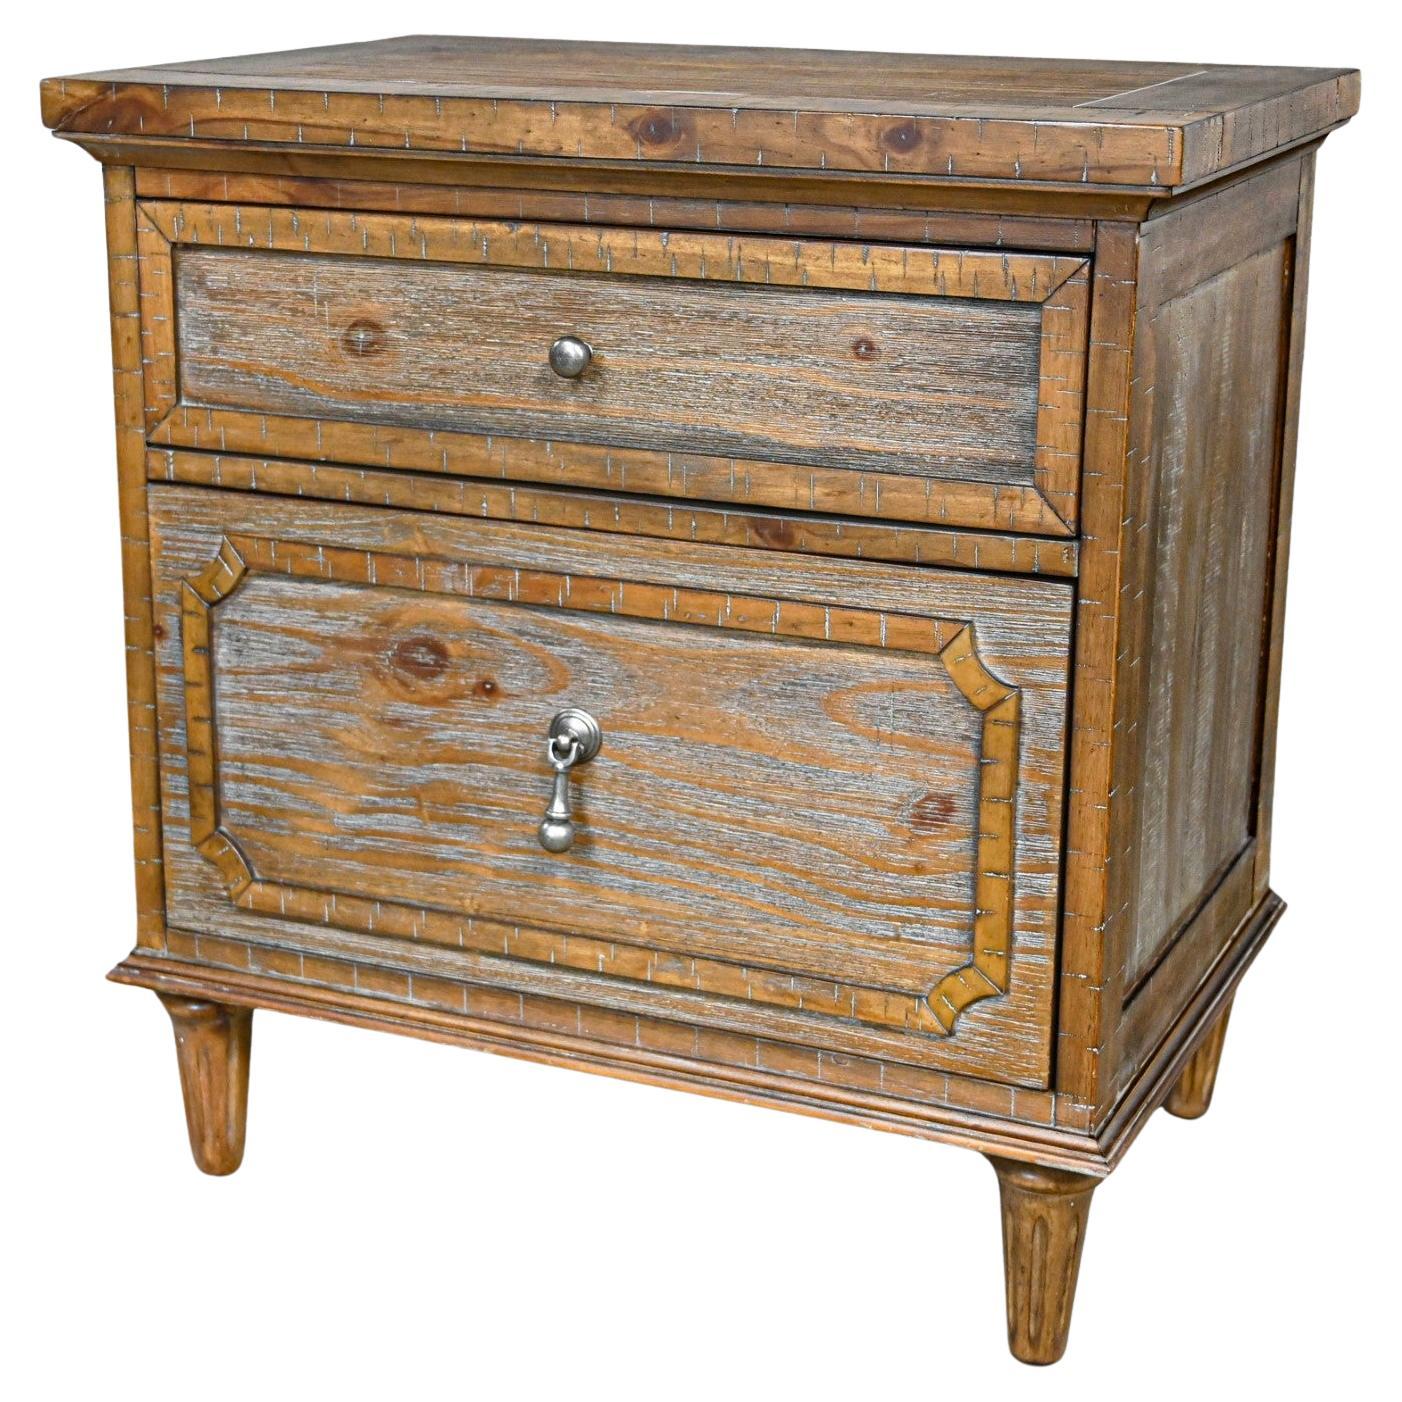 Early 21st Century French Country Rustic Mahogany Nightstand End Table Cabinet